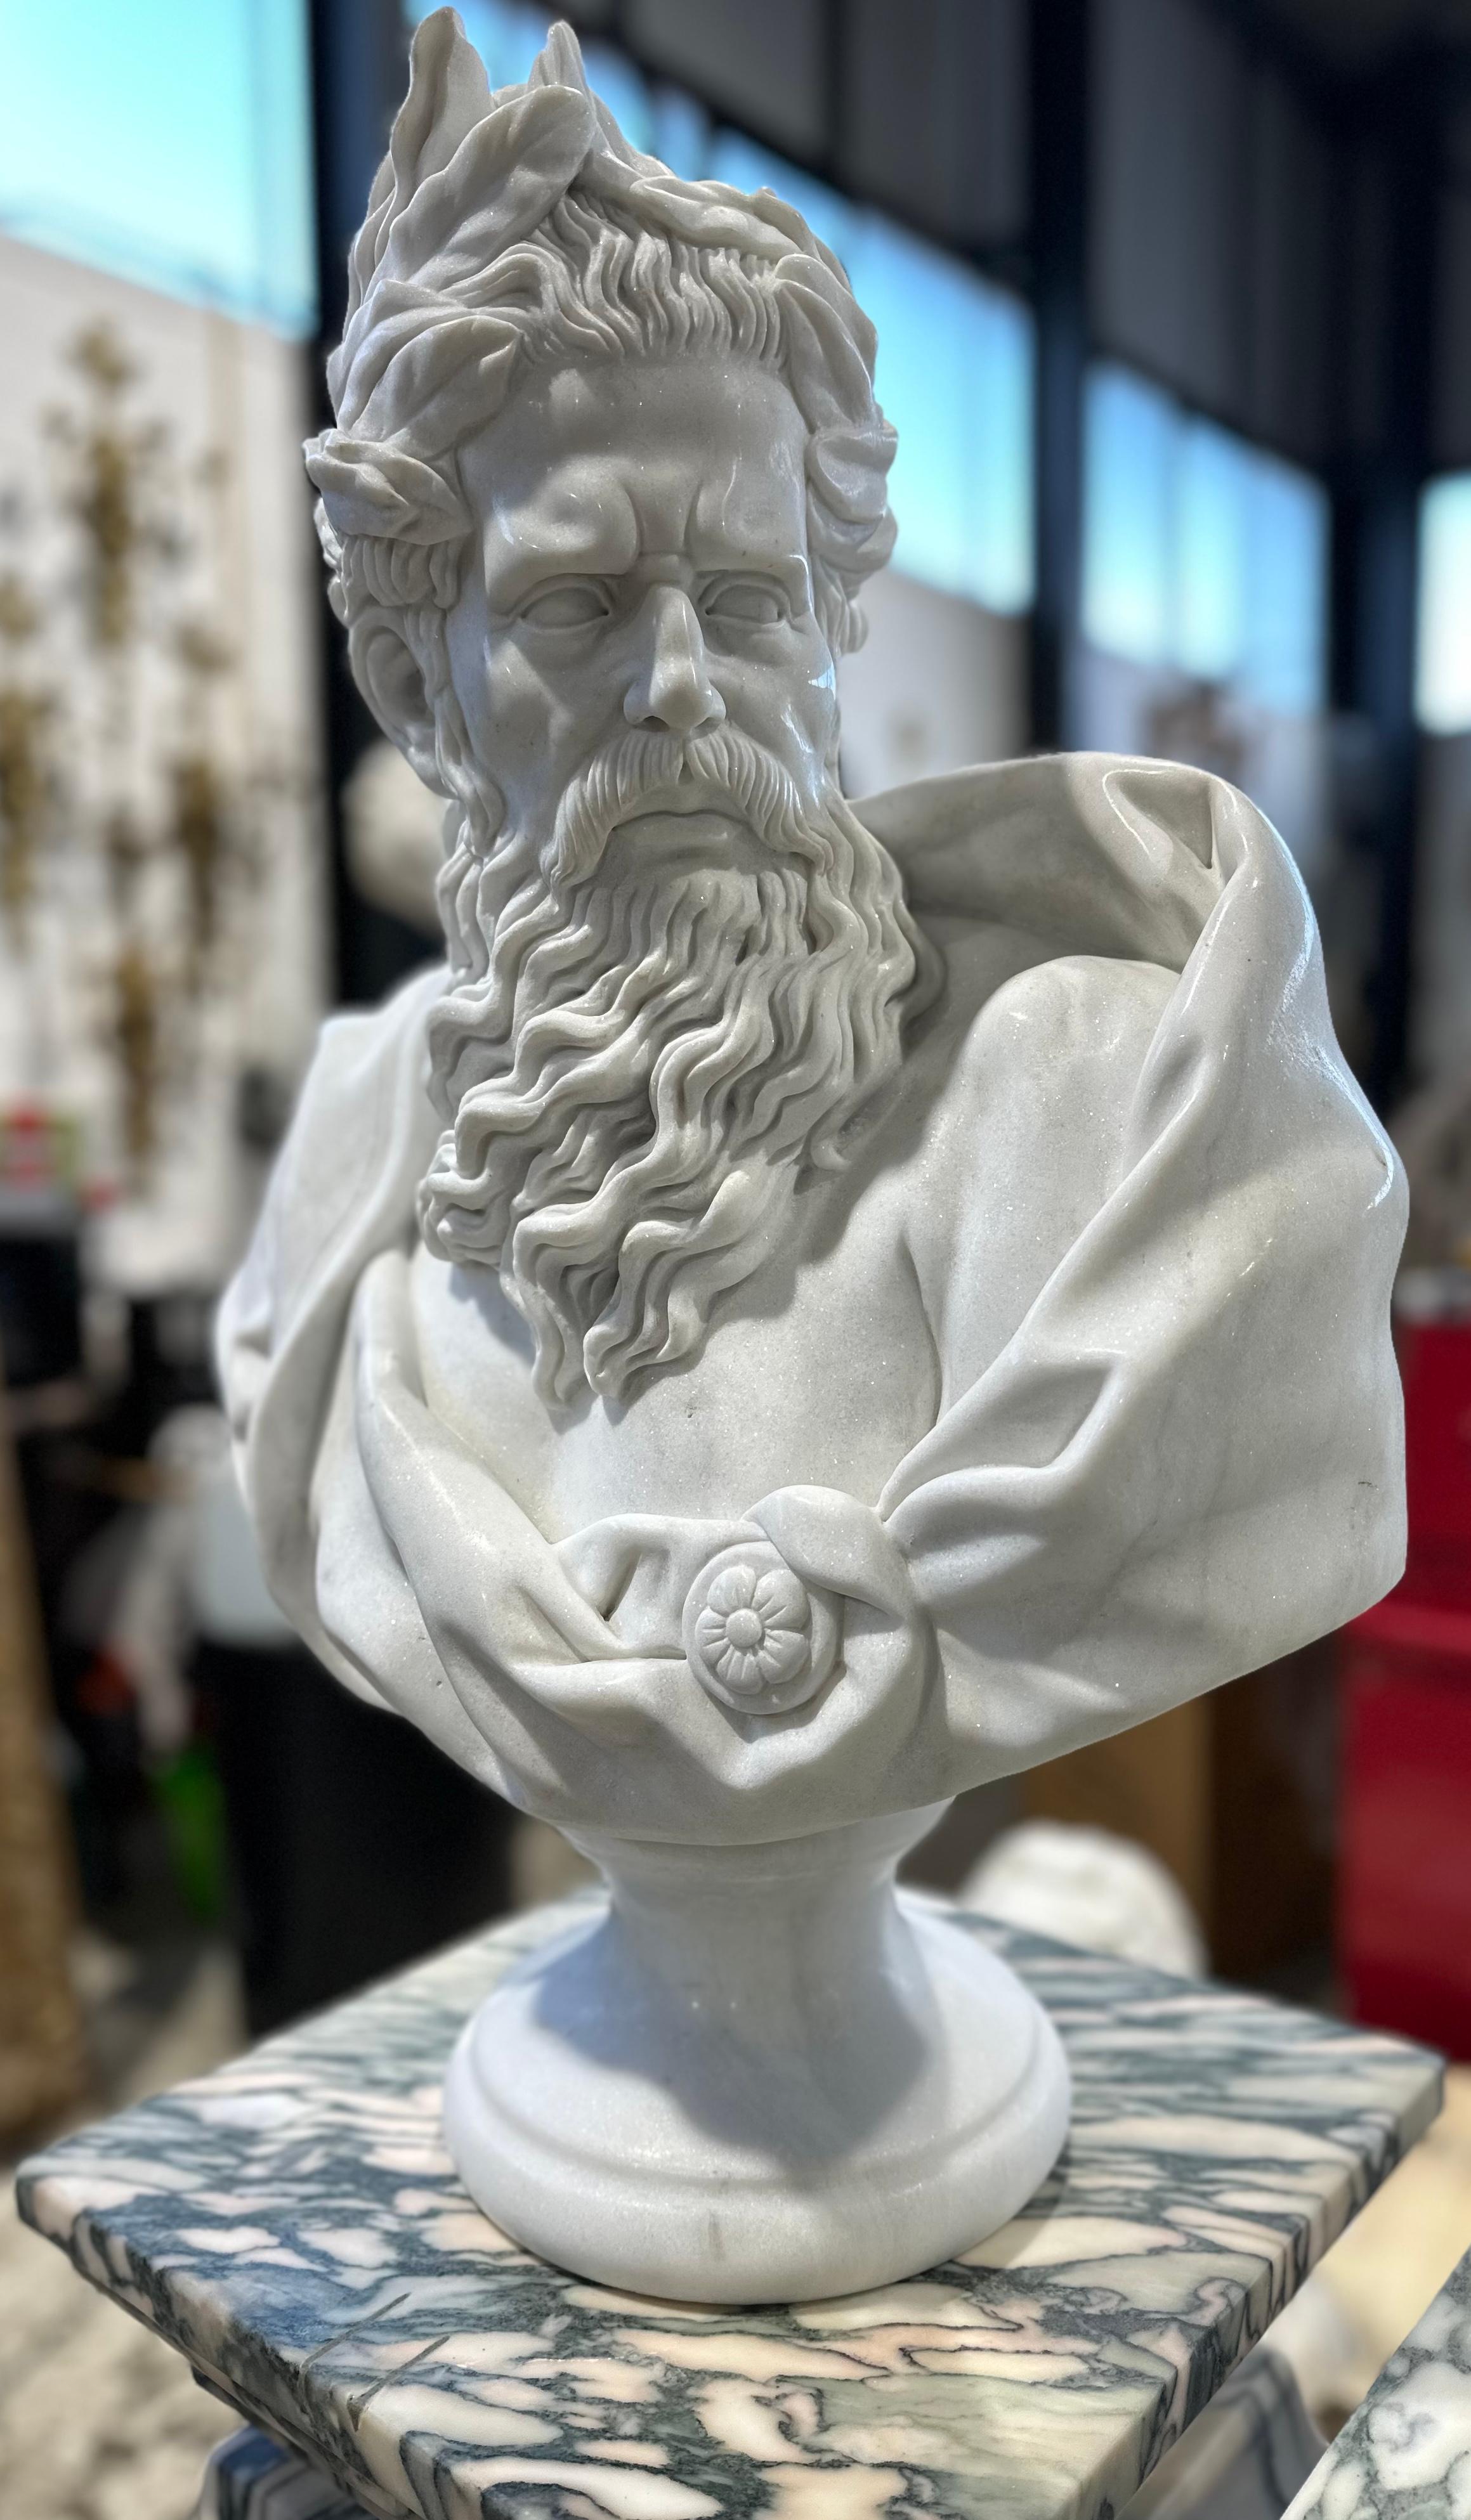 A wonderful hand-carved marble male Neoclassical style bust on a decorative marble plinth. Clear features and carving to the drapery, hair and beard. The texture of the hair contrasts beautifully with the smooth creases of the clothing. A decorative